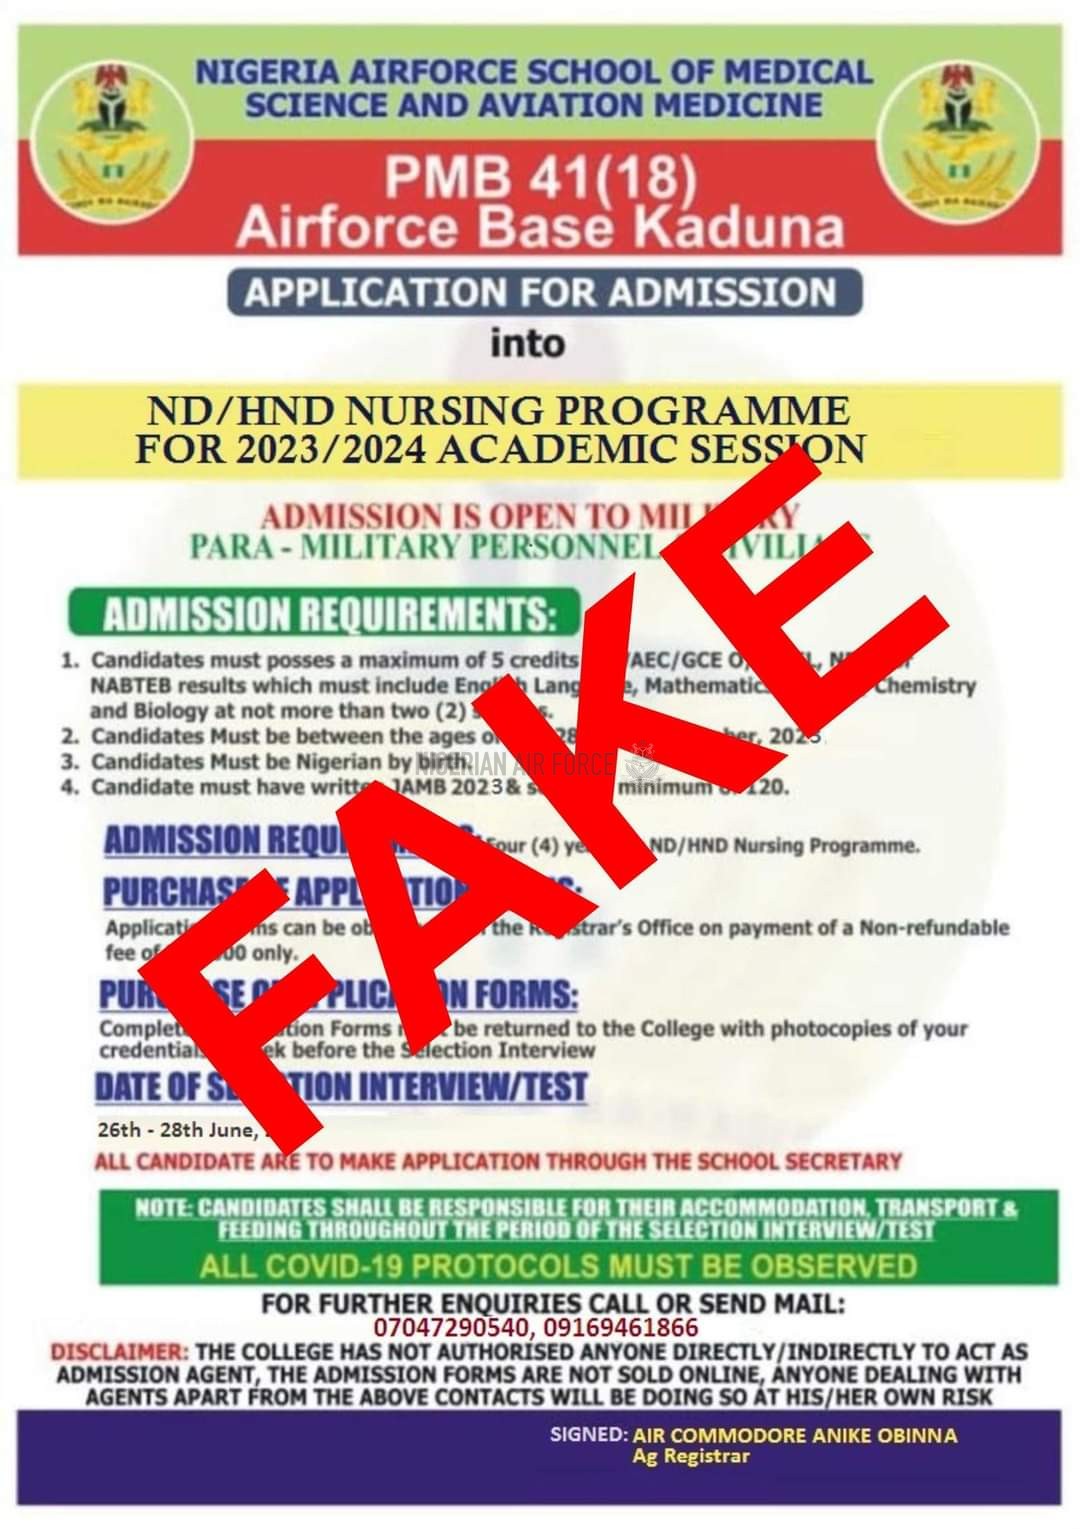 PRESS RELEASE  WARNING AGAINST FAKE ADMISSION INTO NIGERIAN AIR FORCE SCHOOL OF MEDICAL SCIENCES AND AVIATION MEDICINE